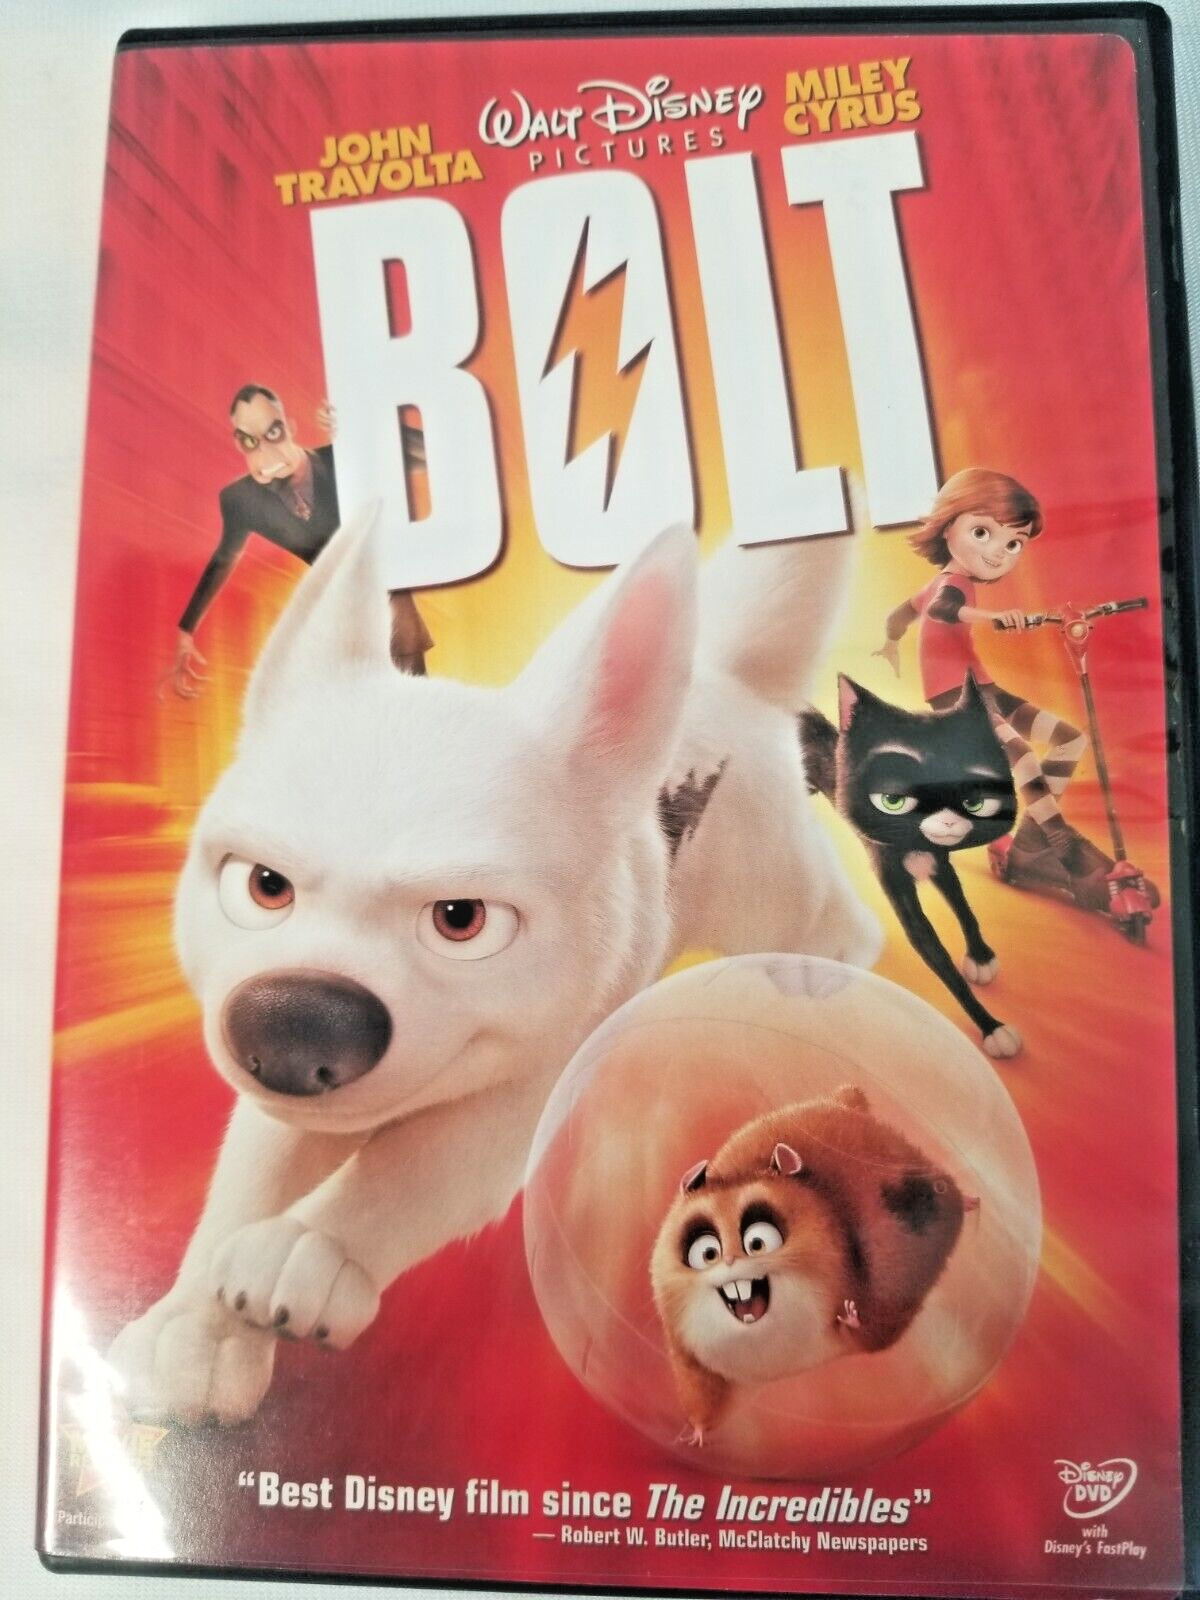 Primary image for Bolt - John Travolta, Miley Cyrus, Walt Disney Pictures DVD : Free Shipping